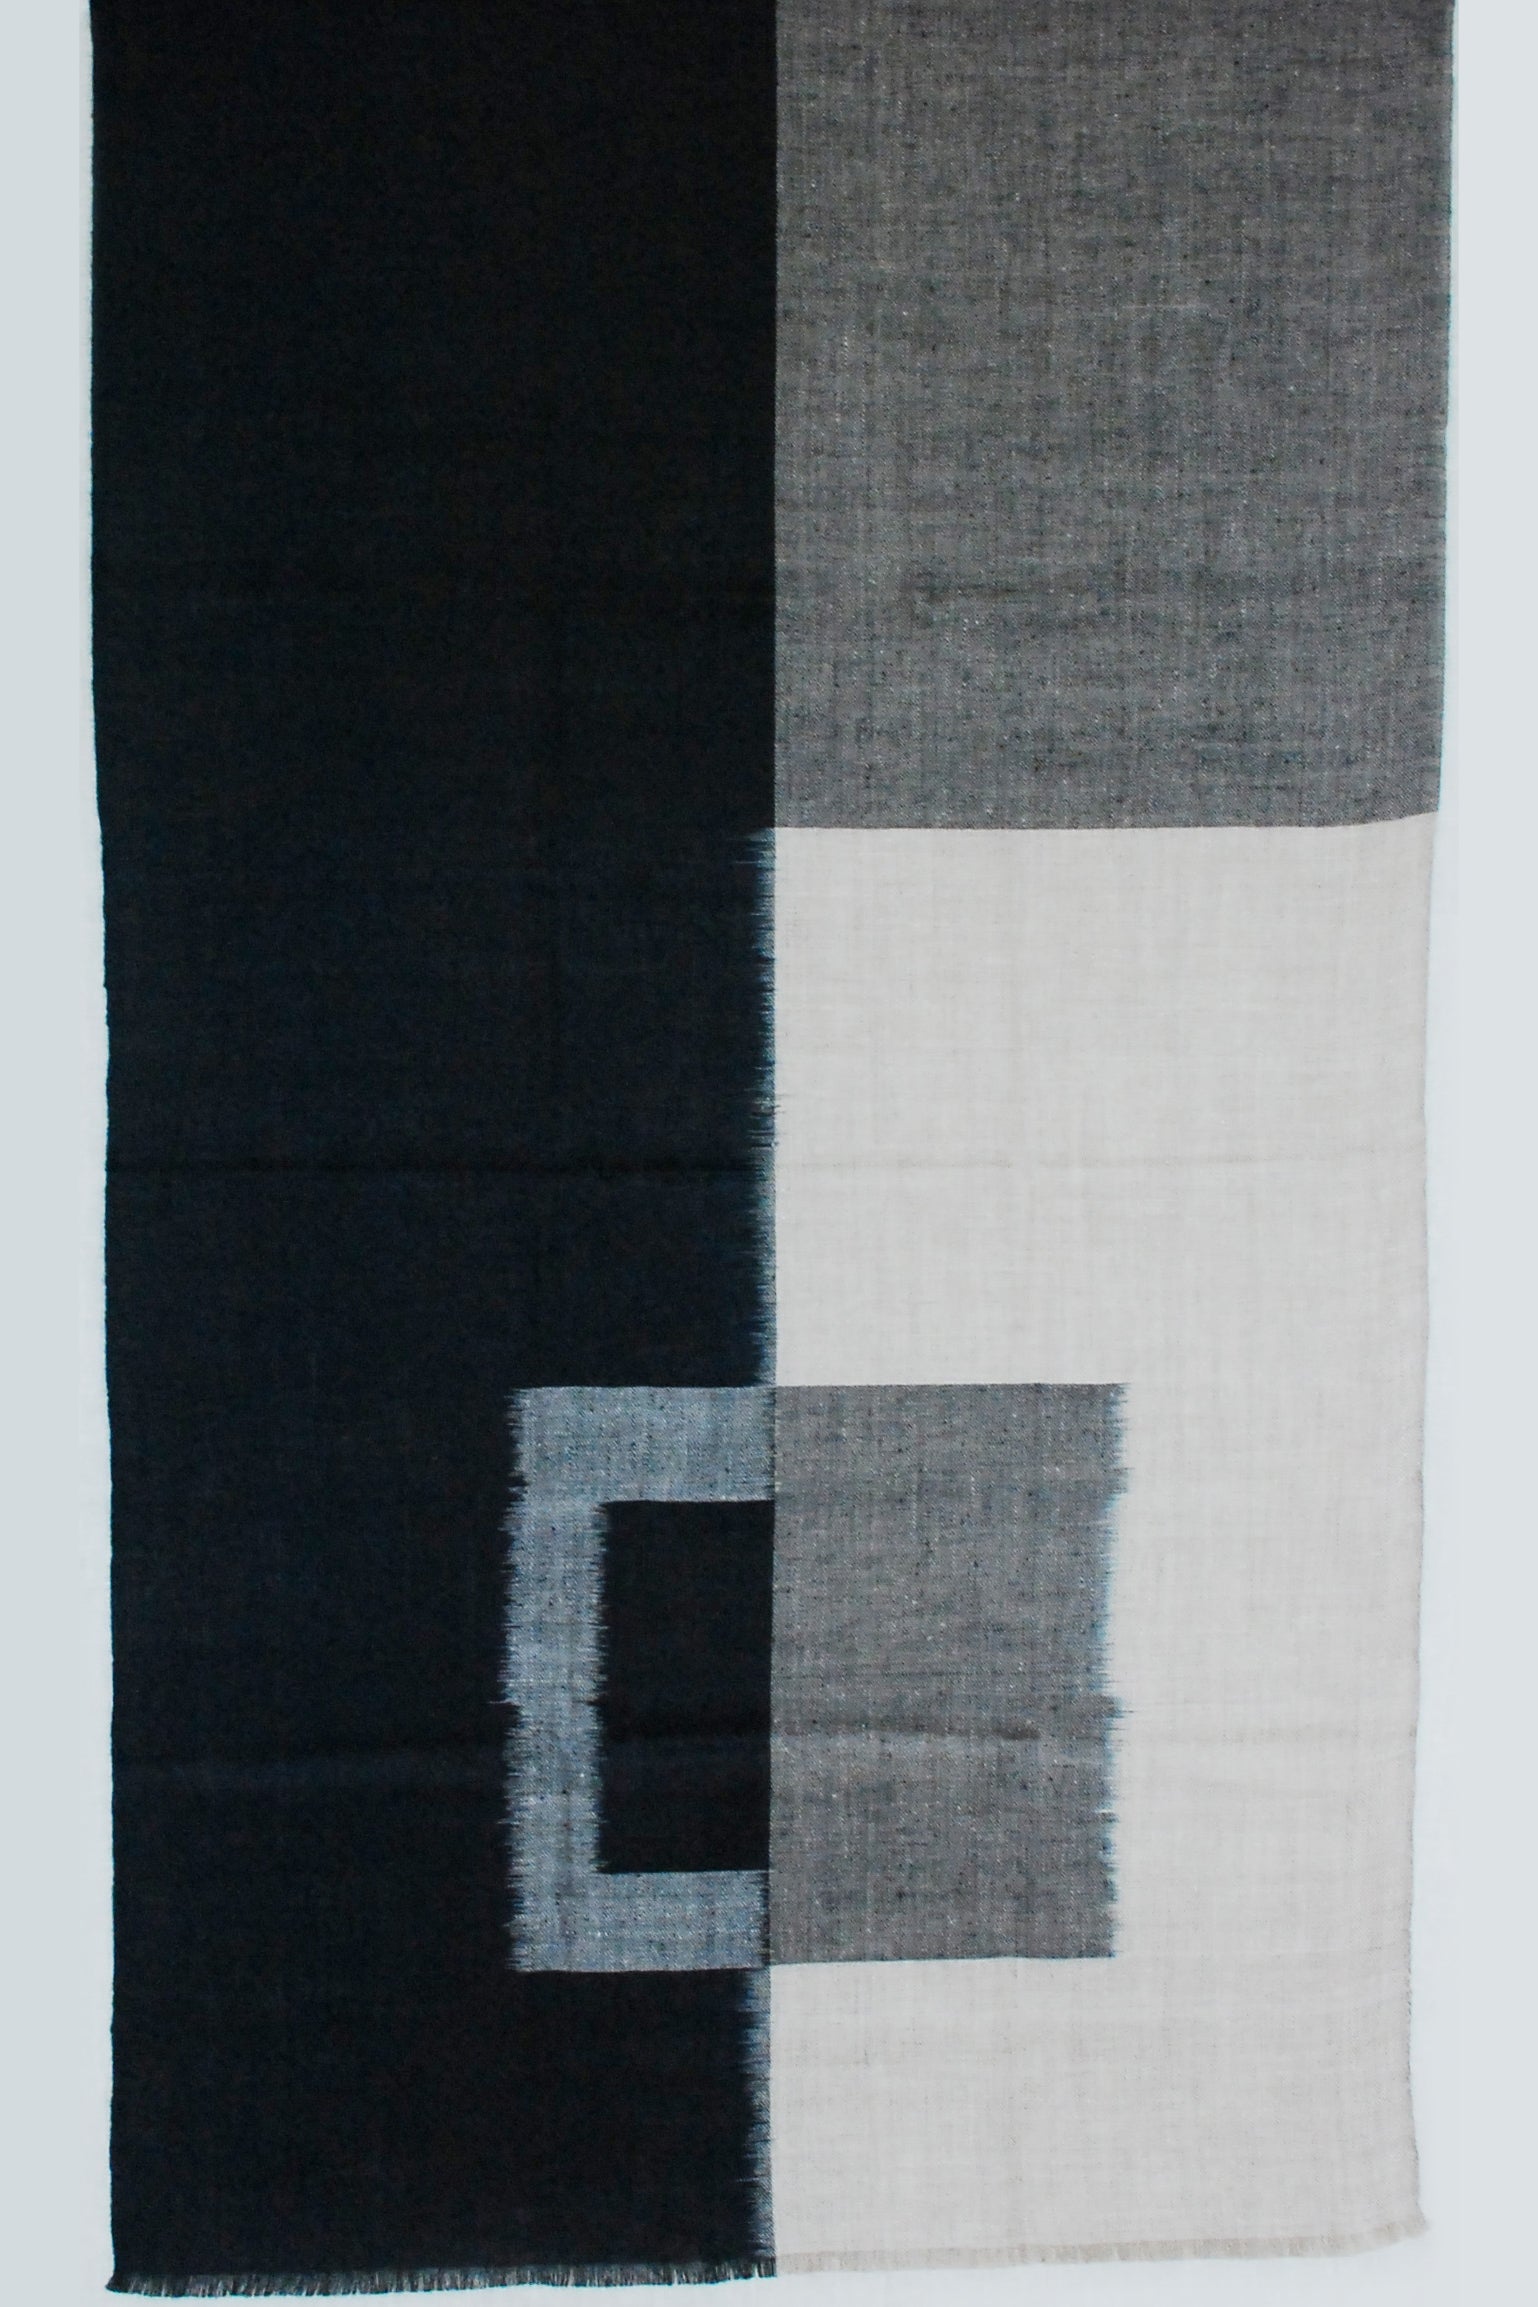 Pashmina Cashmere Scarf in Black and Grey Ikat